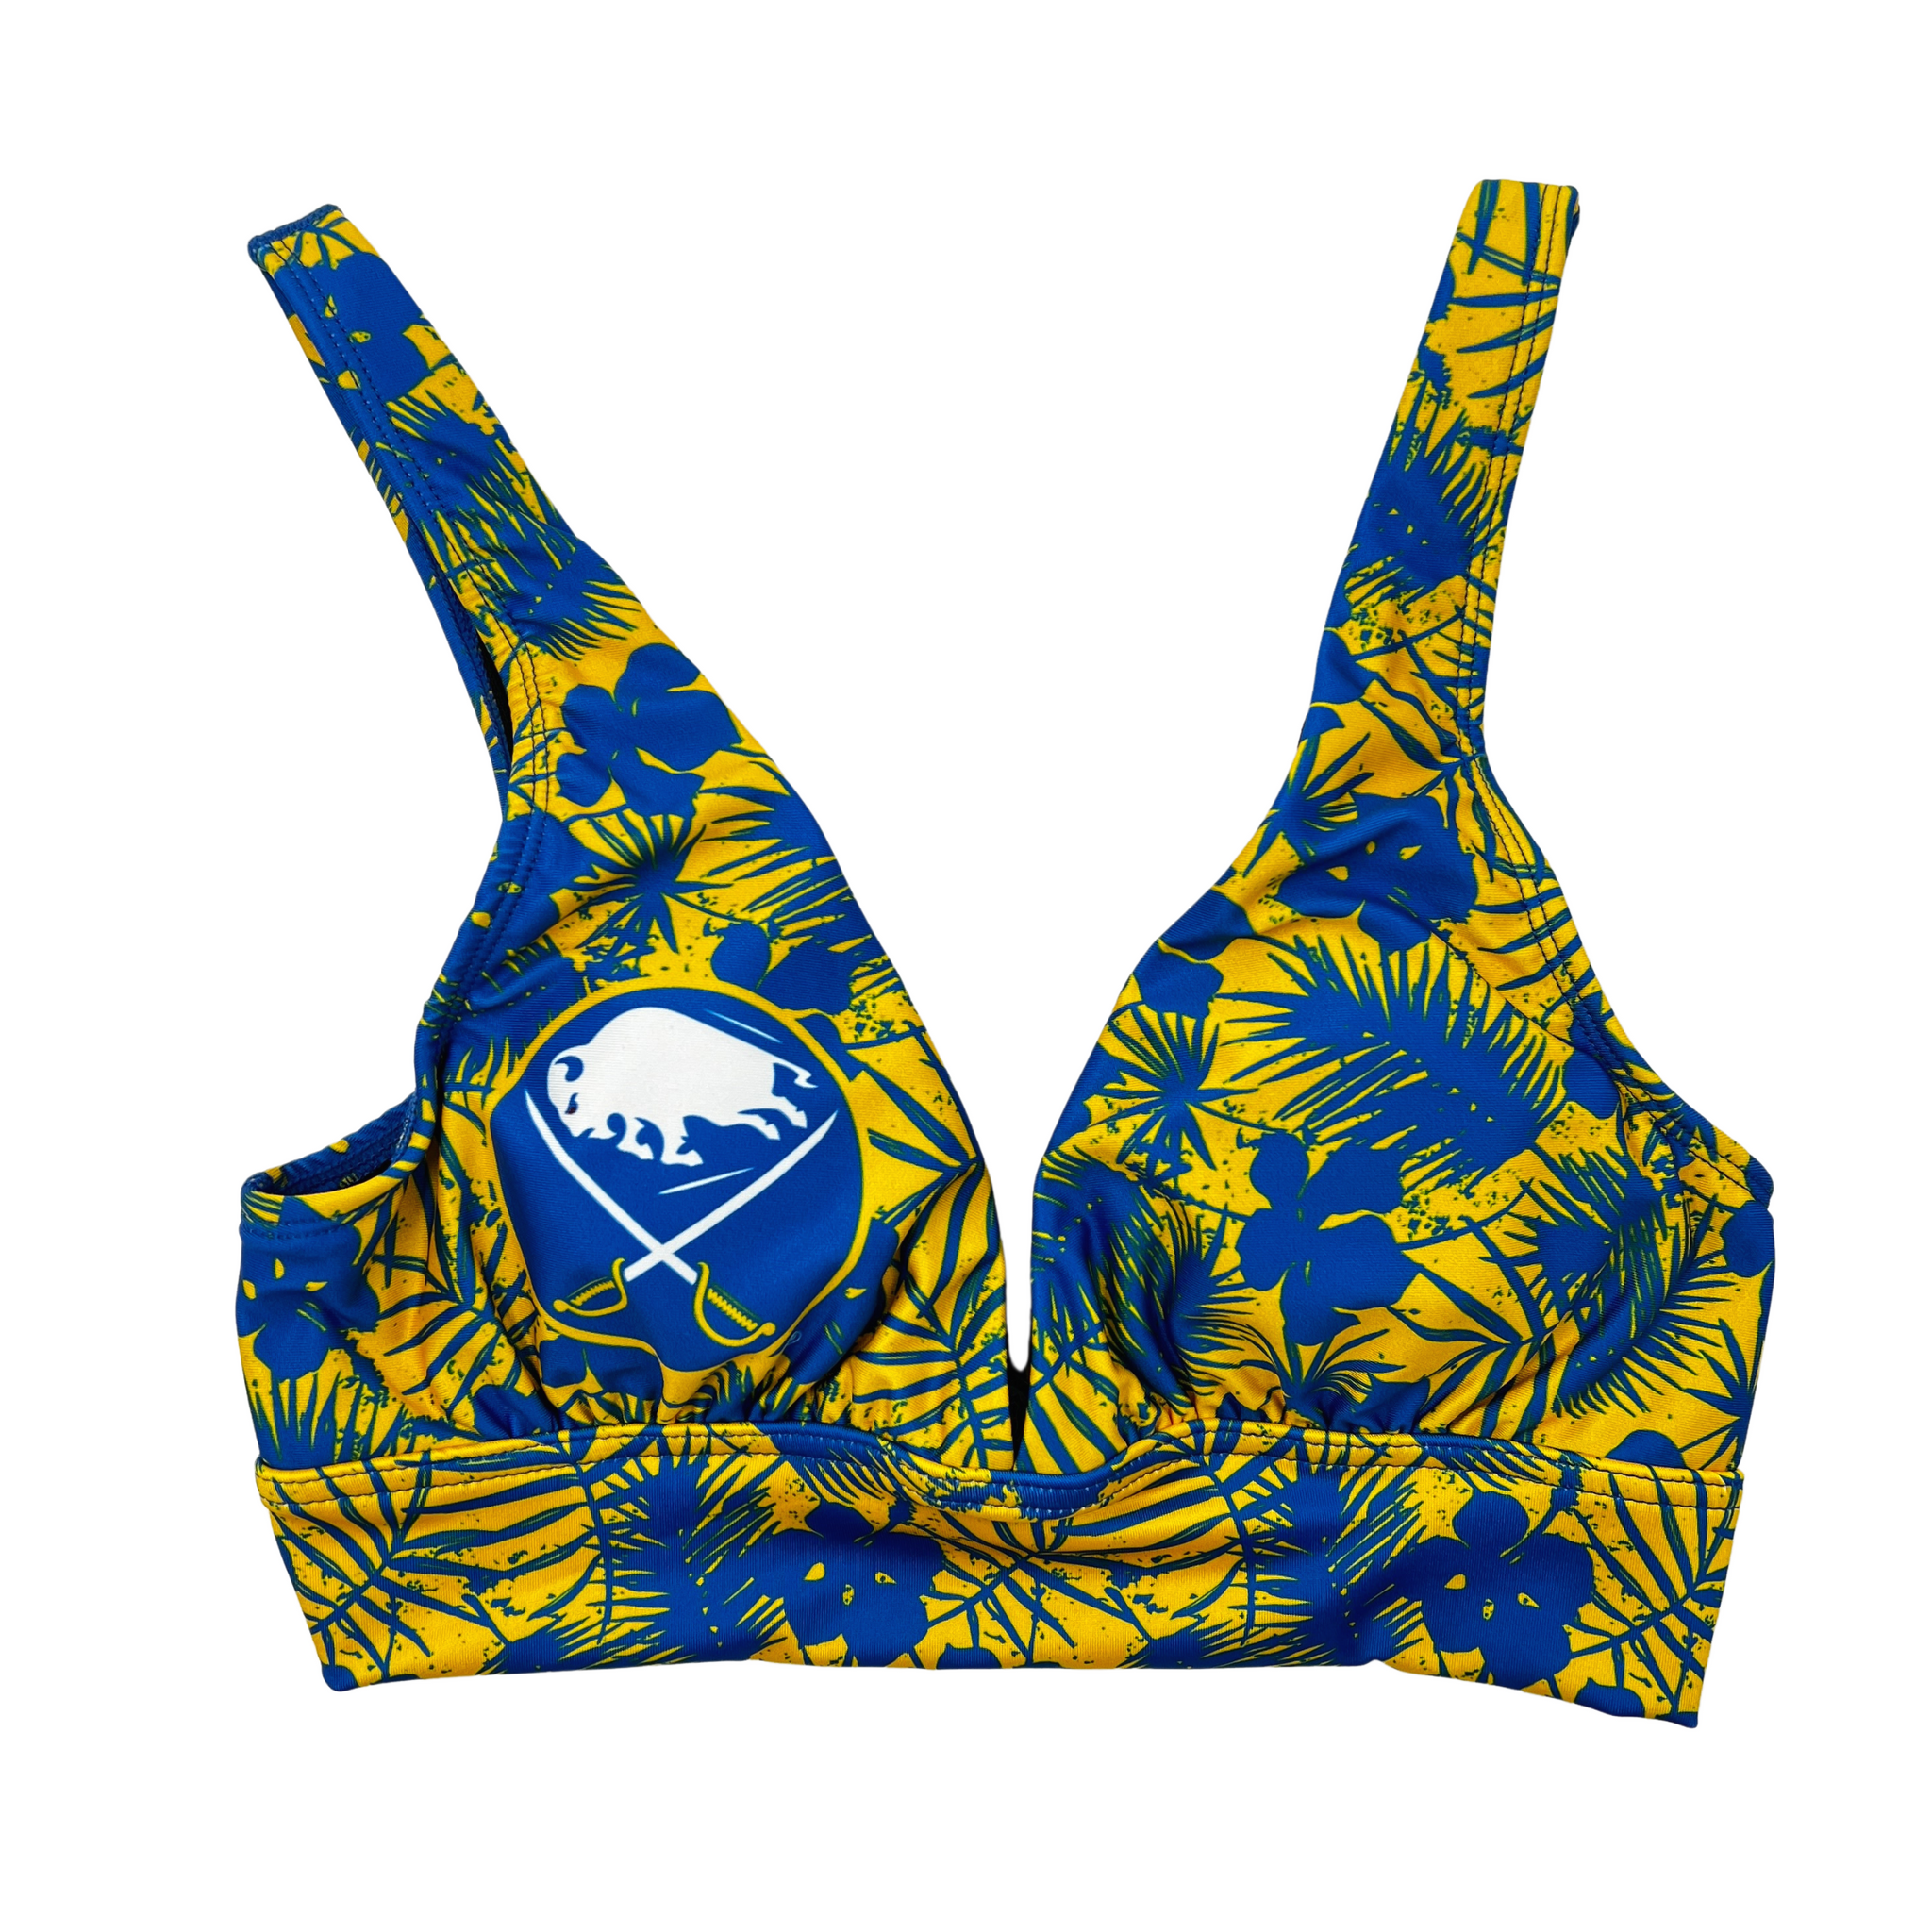 Buffalo Sabres - Our new royal blue jerseys are available for preorder! 🤩  Call the Sabres Store to get yours: 716-855-4140